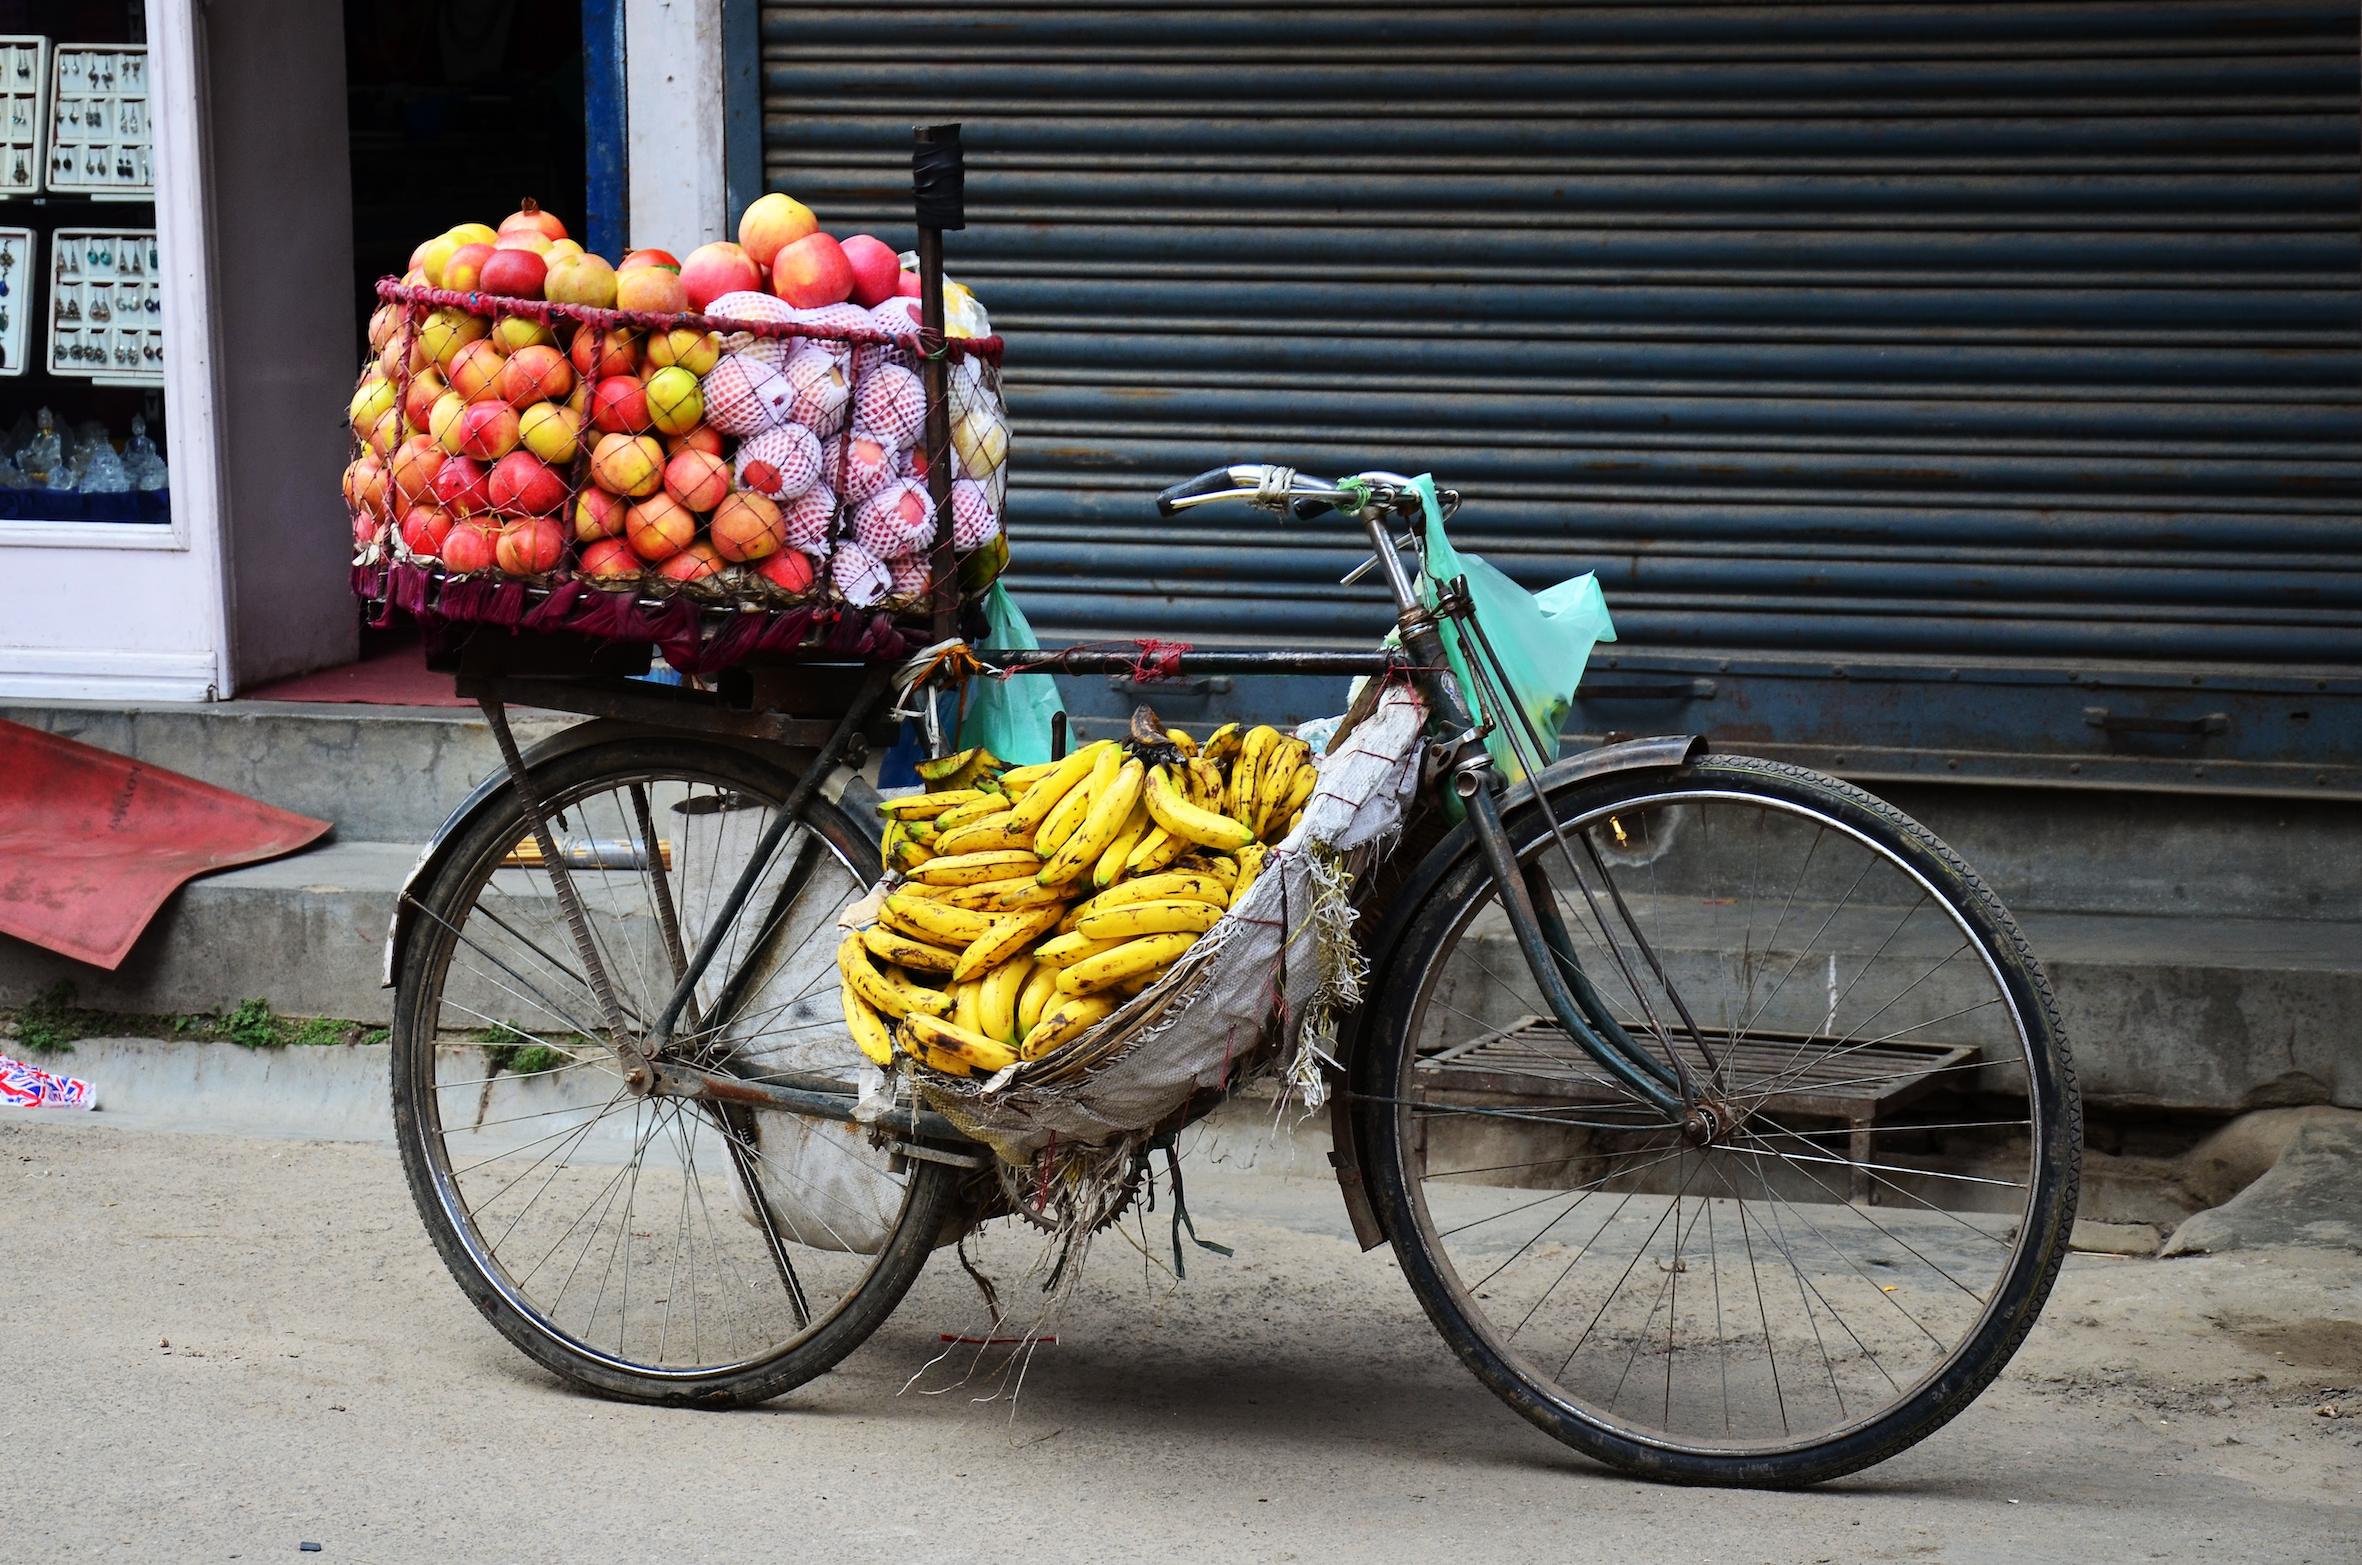 old street bicycle loaded with apples and bananas